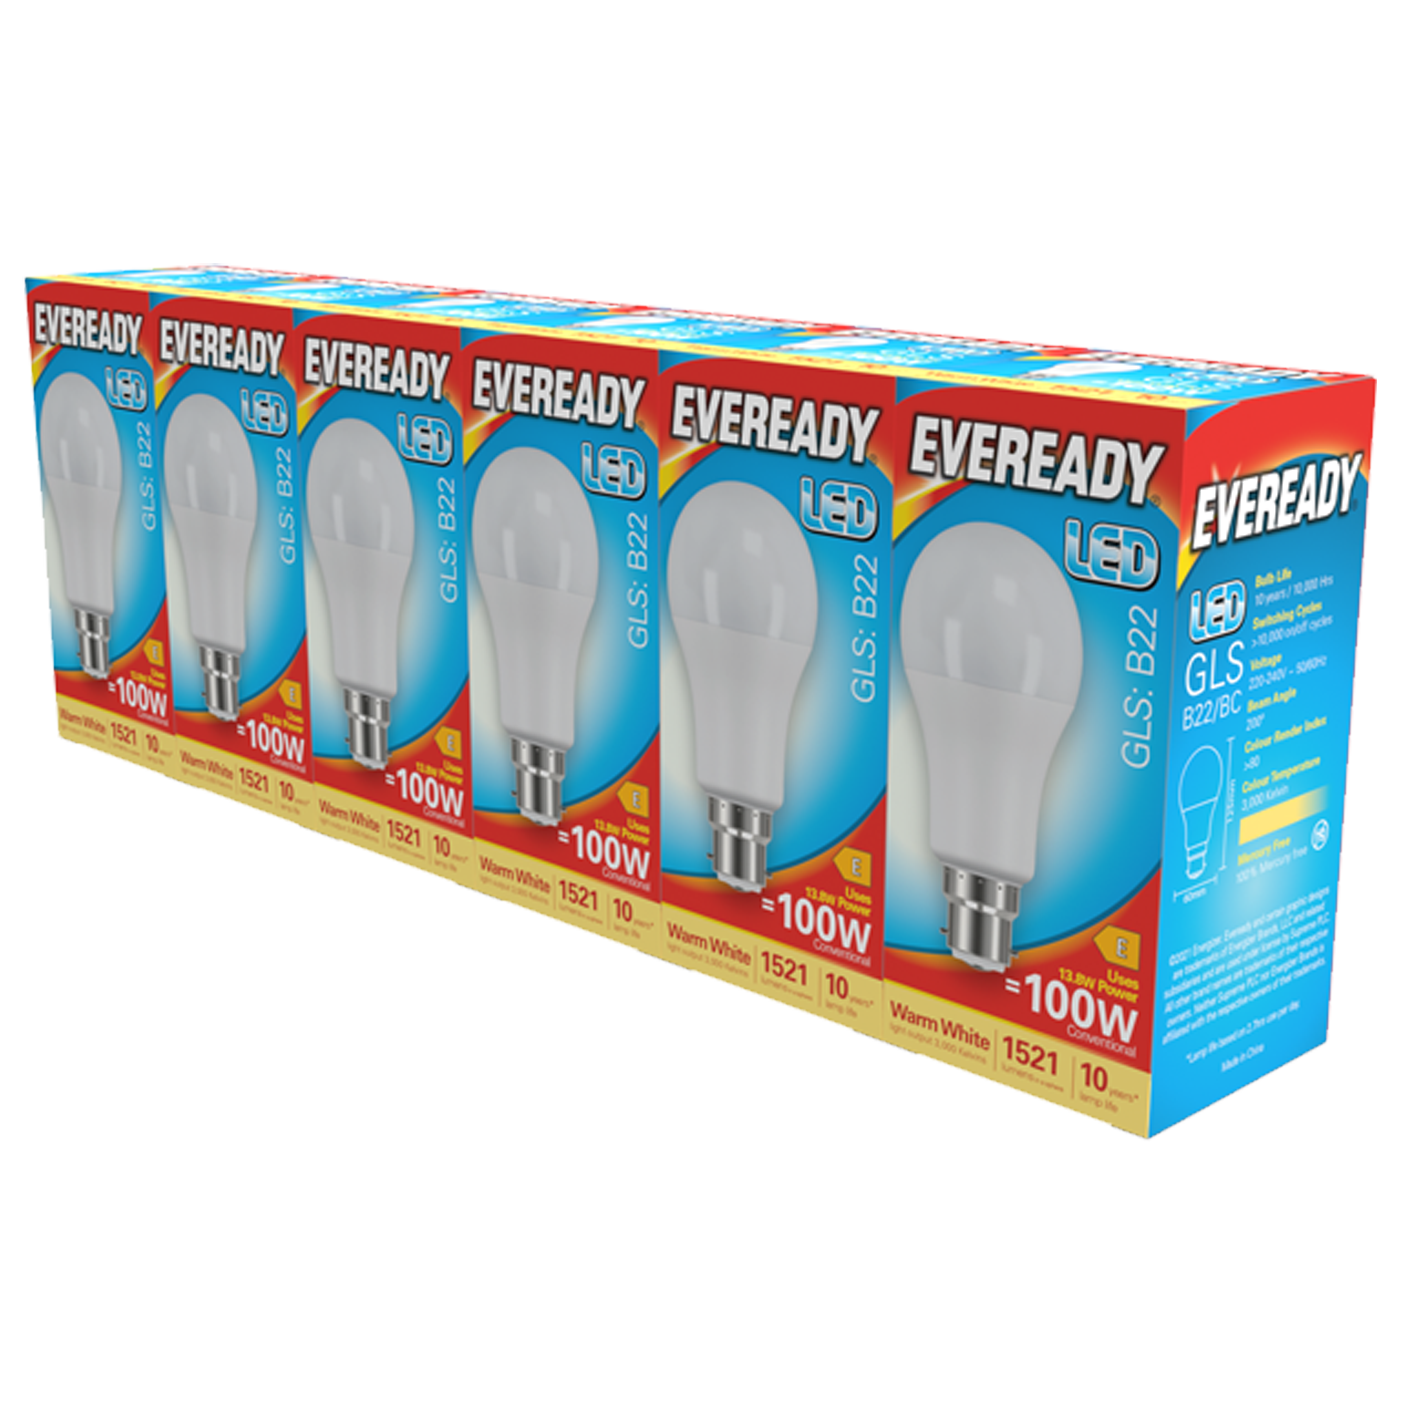 Eveready LED GLS  B22 (BC) 1521lm 13.8W 3000K (Warm White) Pack of 5+1